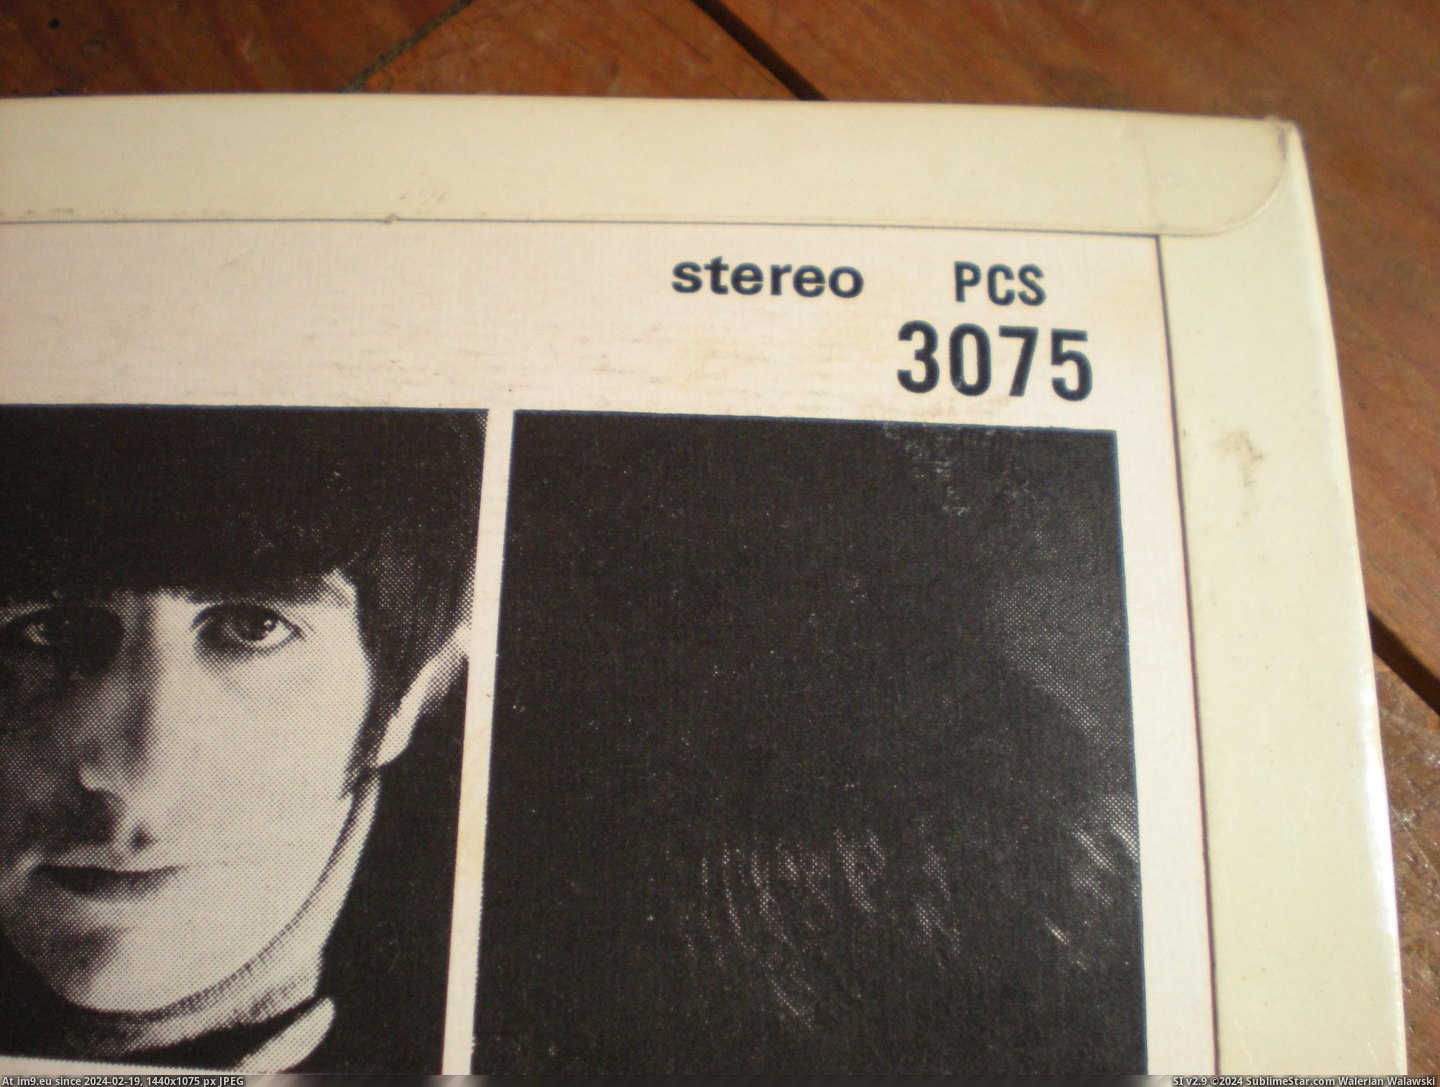 #Rubber #Stereo #Soul Rubber Soul STEREO 8 Pic. (Изображение из альбом new 1))